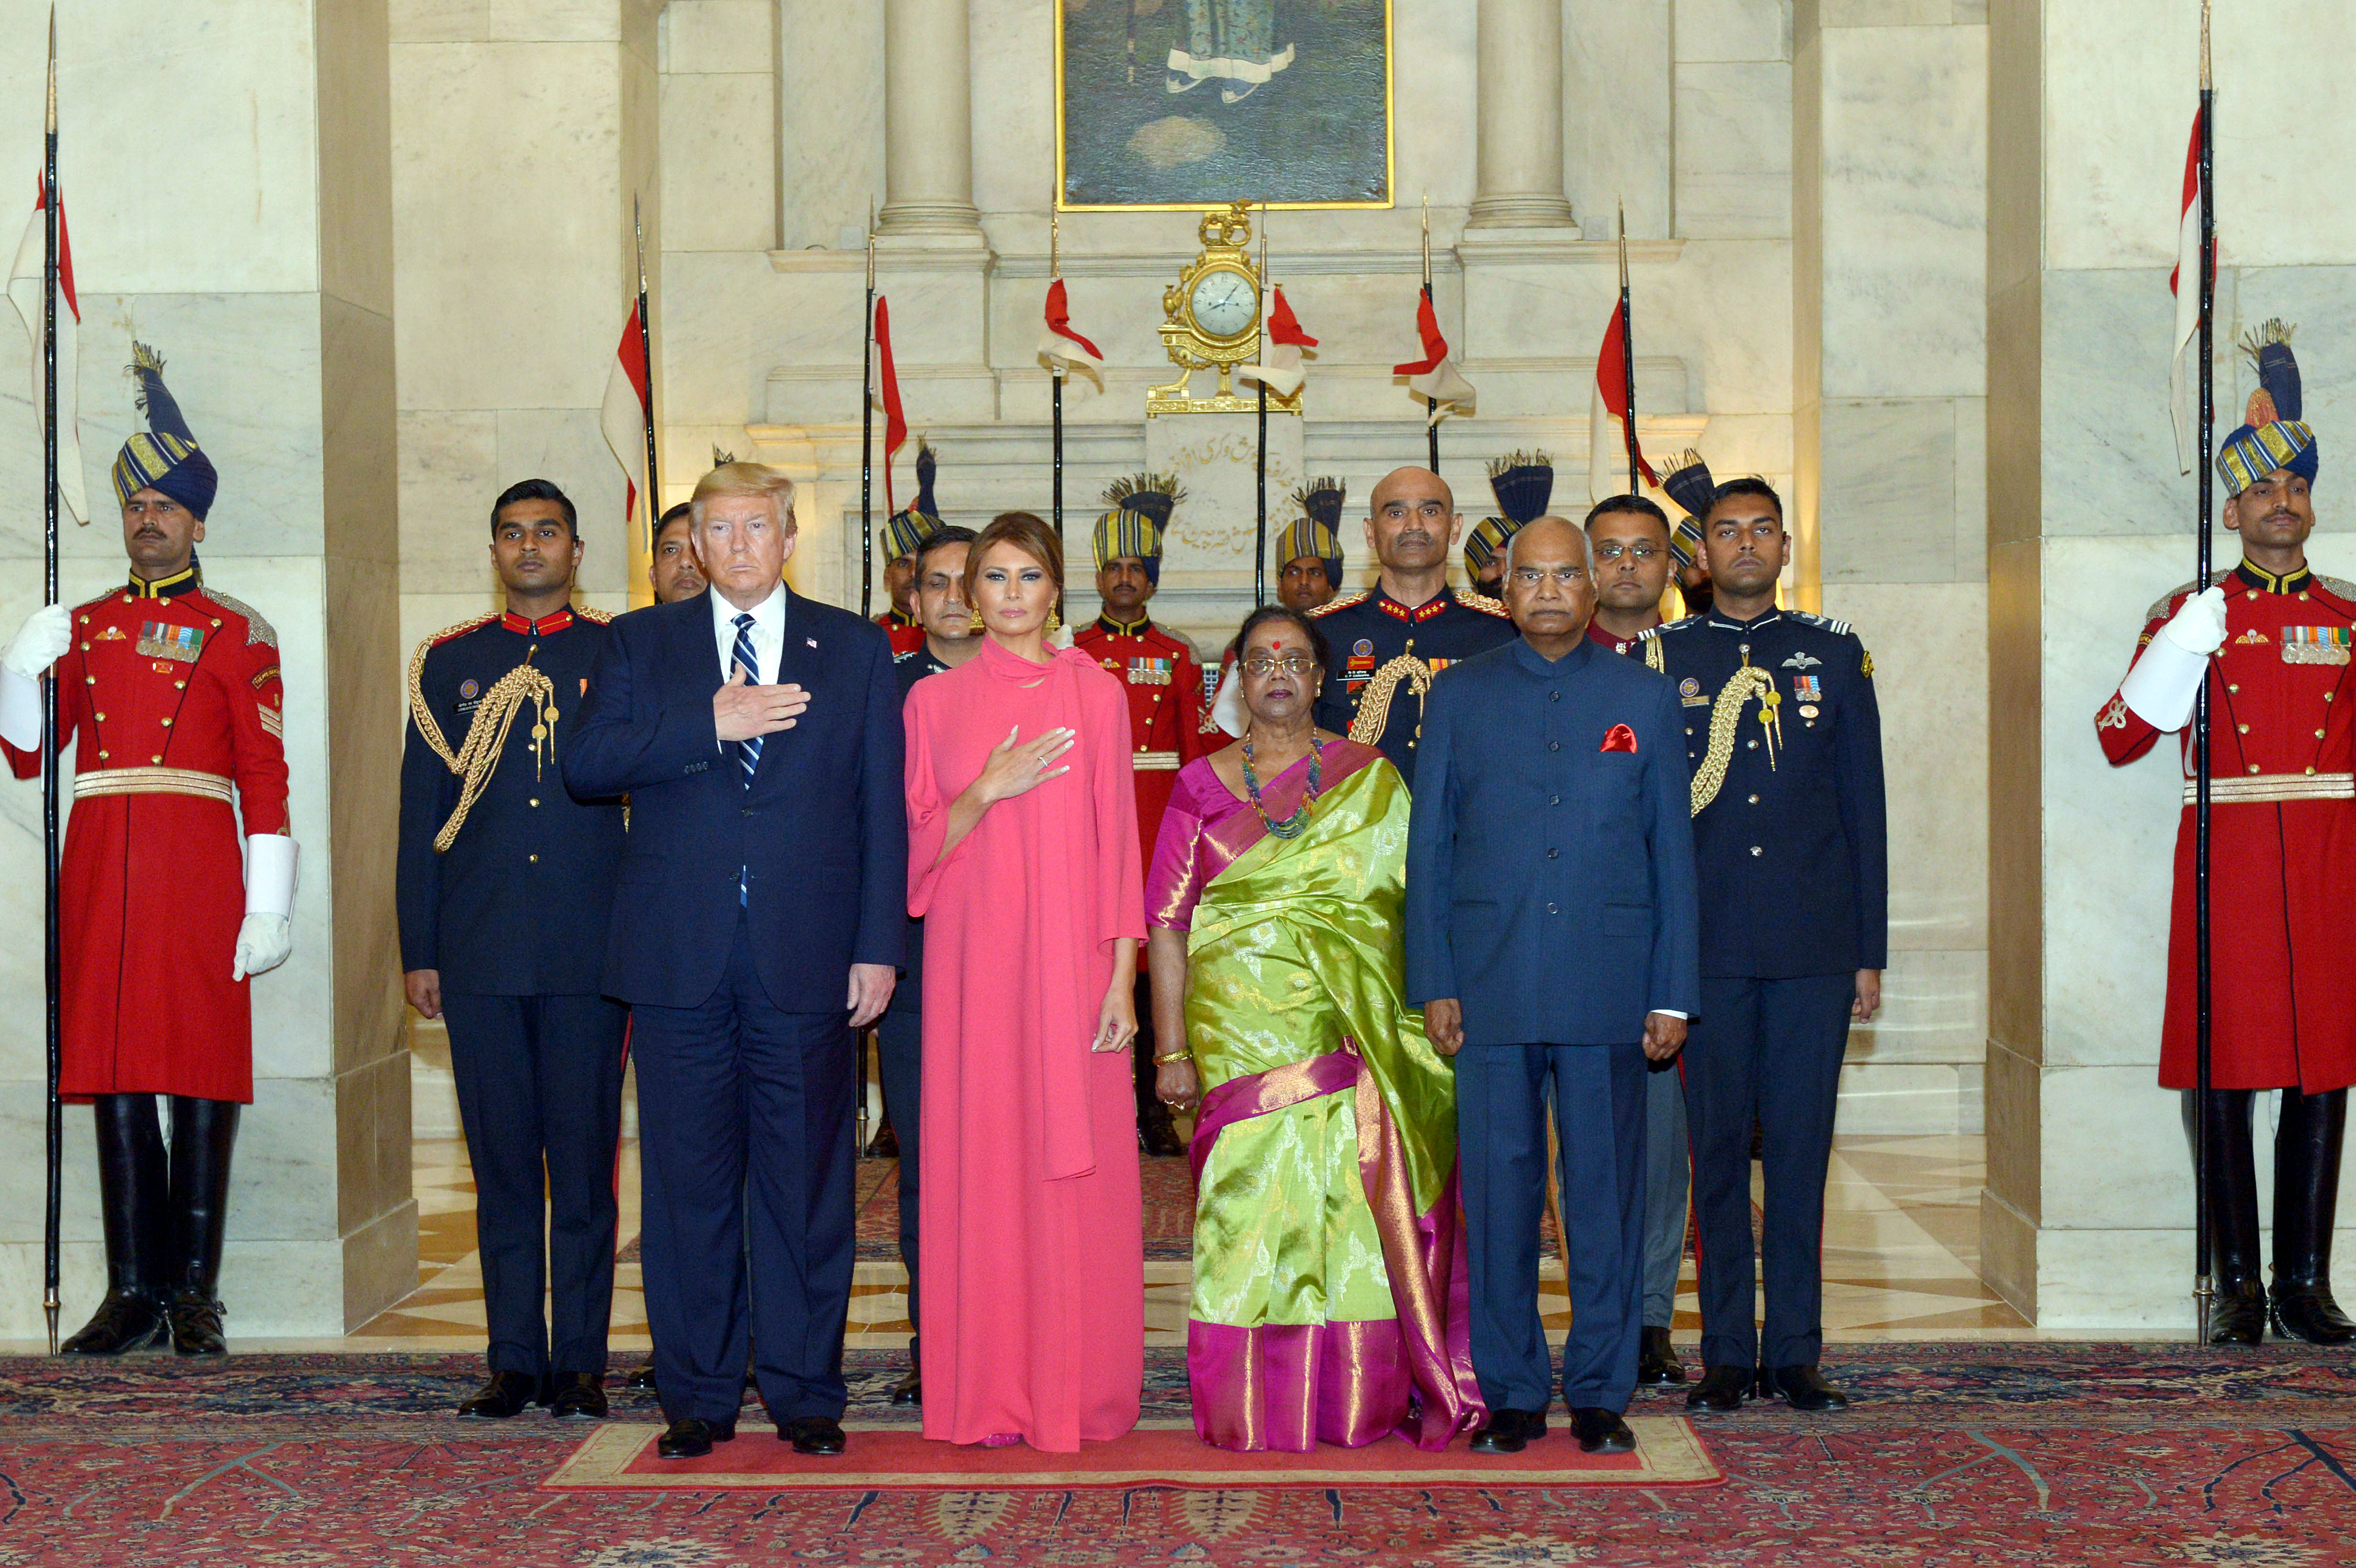 Donald Trump attend state dinner hosted by President Kovind at Rashtrapati Bhawan | See Pics